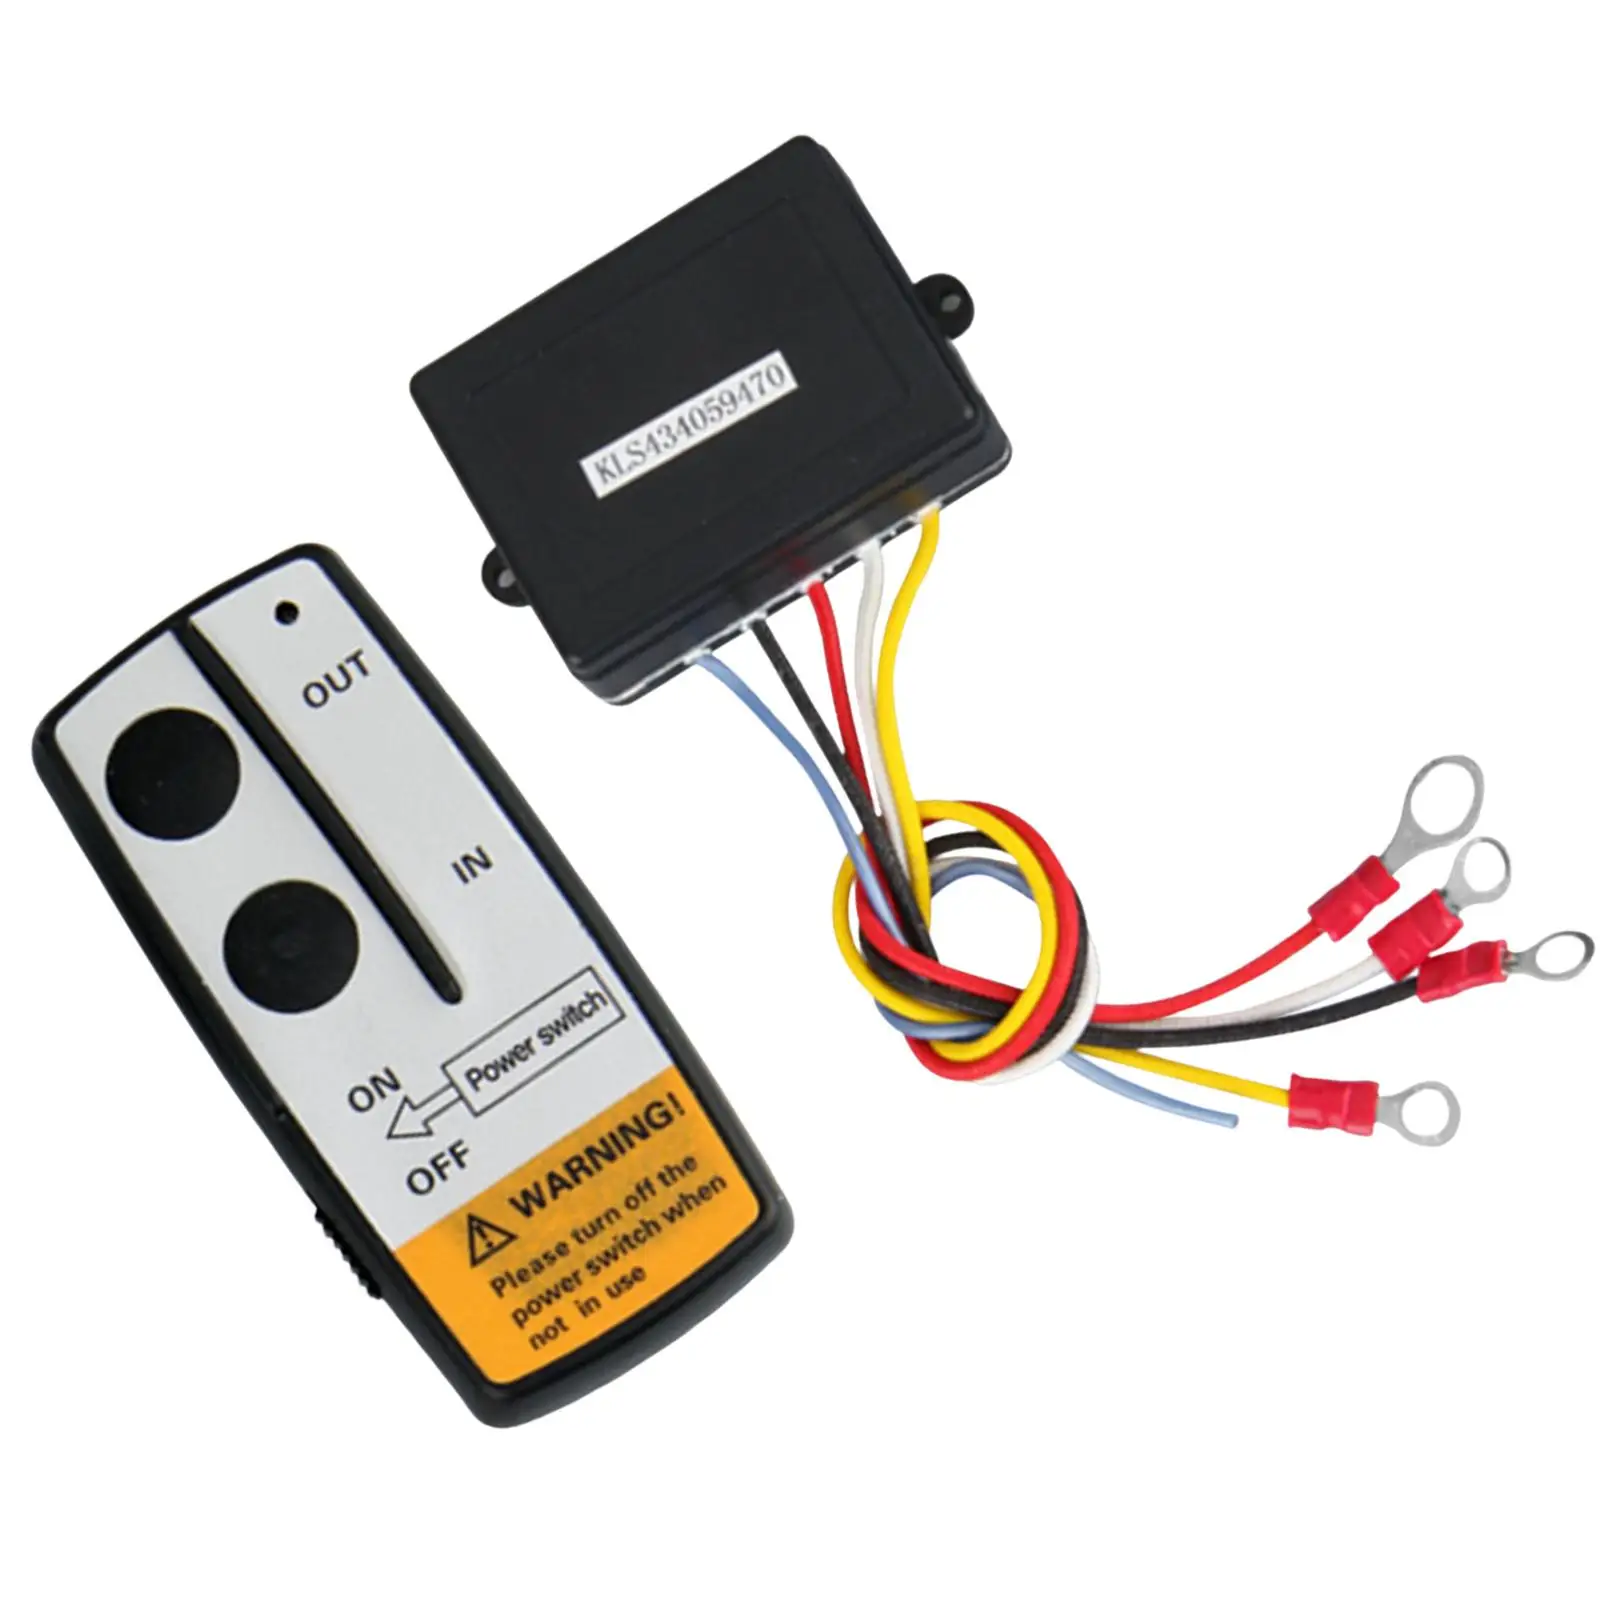 Winch Remote Control Kit, Handset Switch Controller,Waterproof ,100Feet ,12V